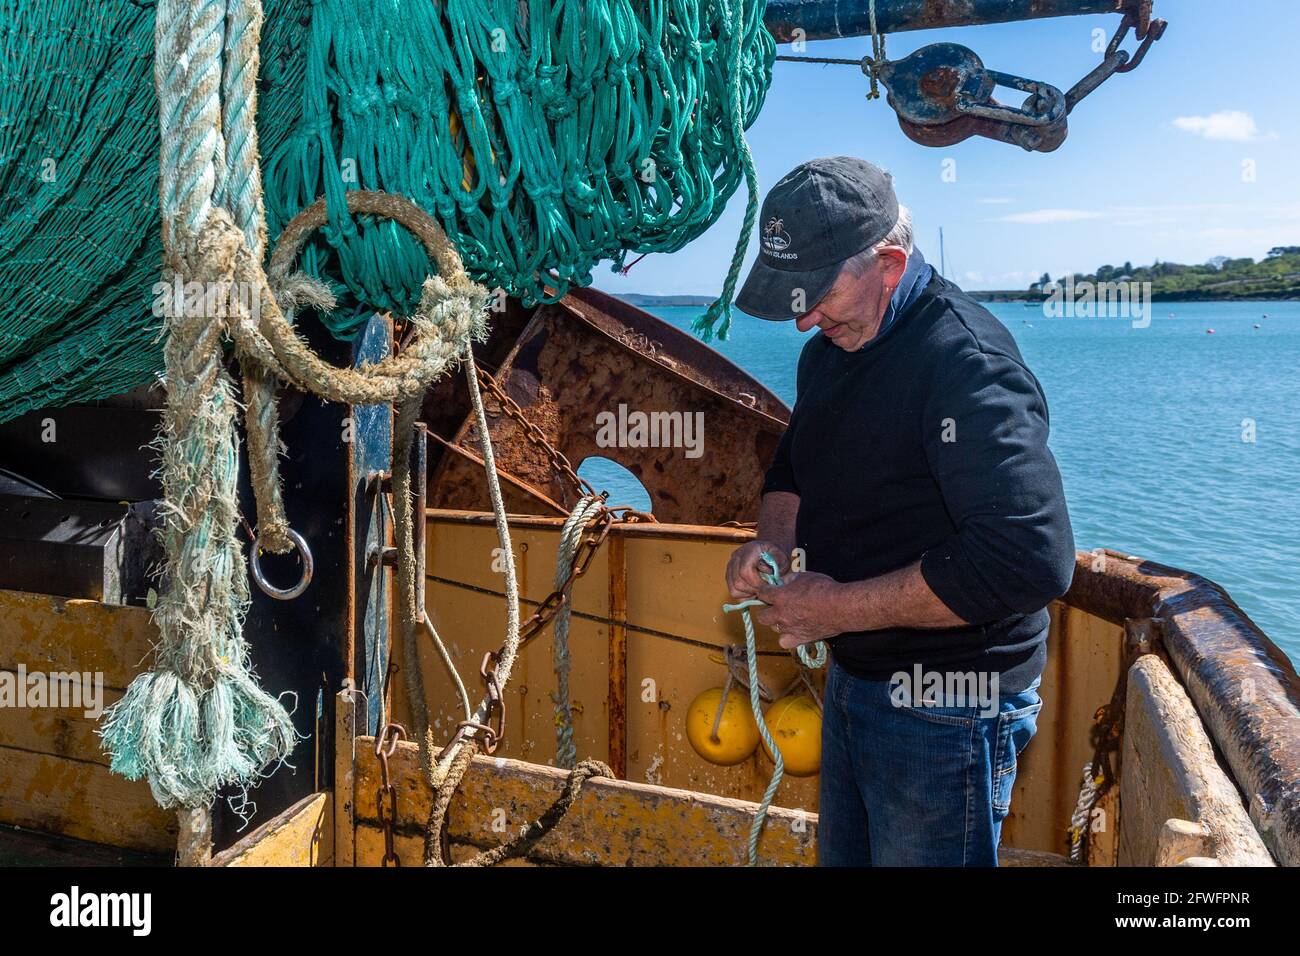 Schull, West Cork, Ireland. 22nd May, 2021. Thomas Sheehan, skipper of the  fishing trawler 'Laetitia', changes one of his fishing nets ahead of a  fishing trip on Monday. The 'Laetitia' is usually